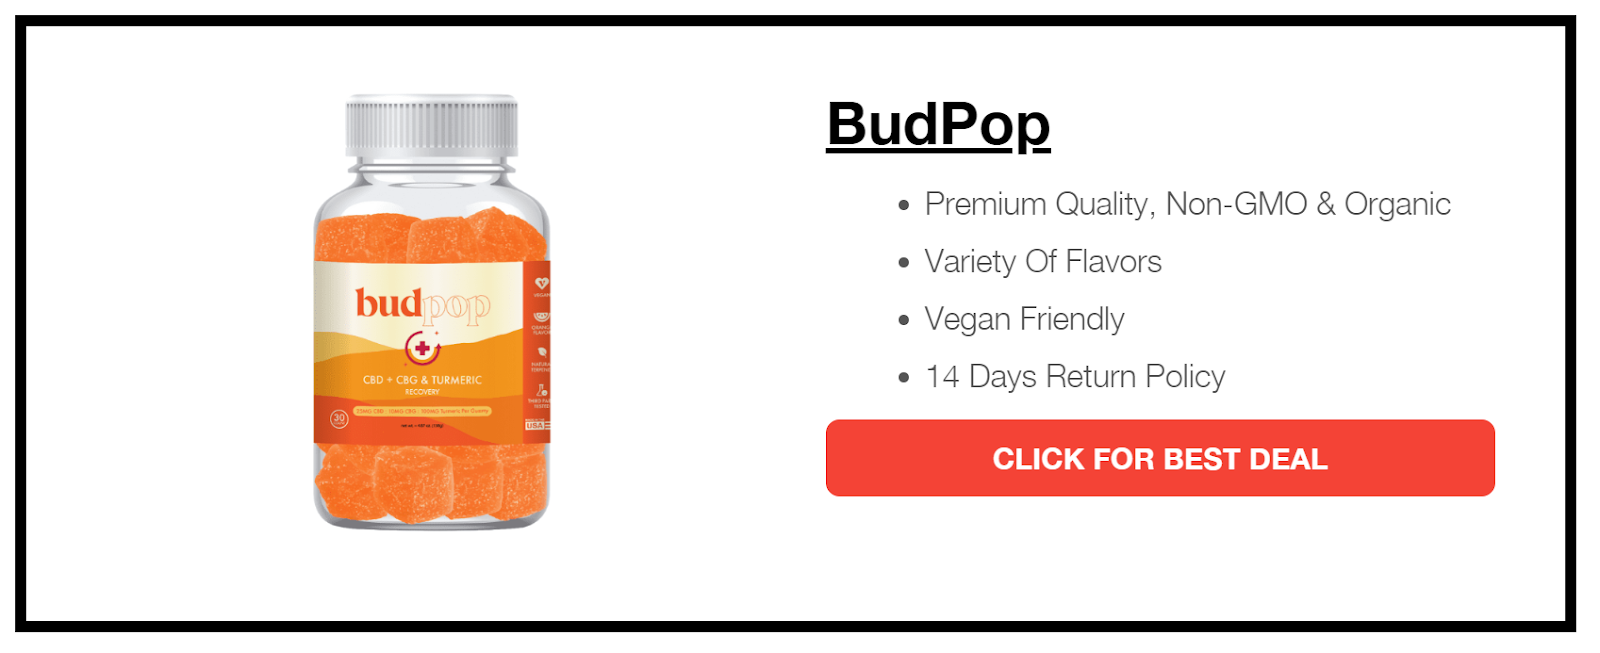 can you buy CBD gummy with food stamps